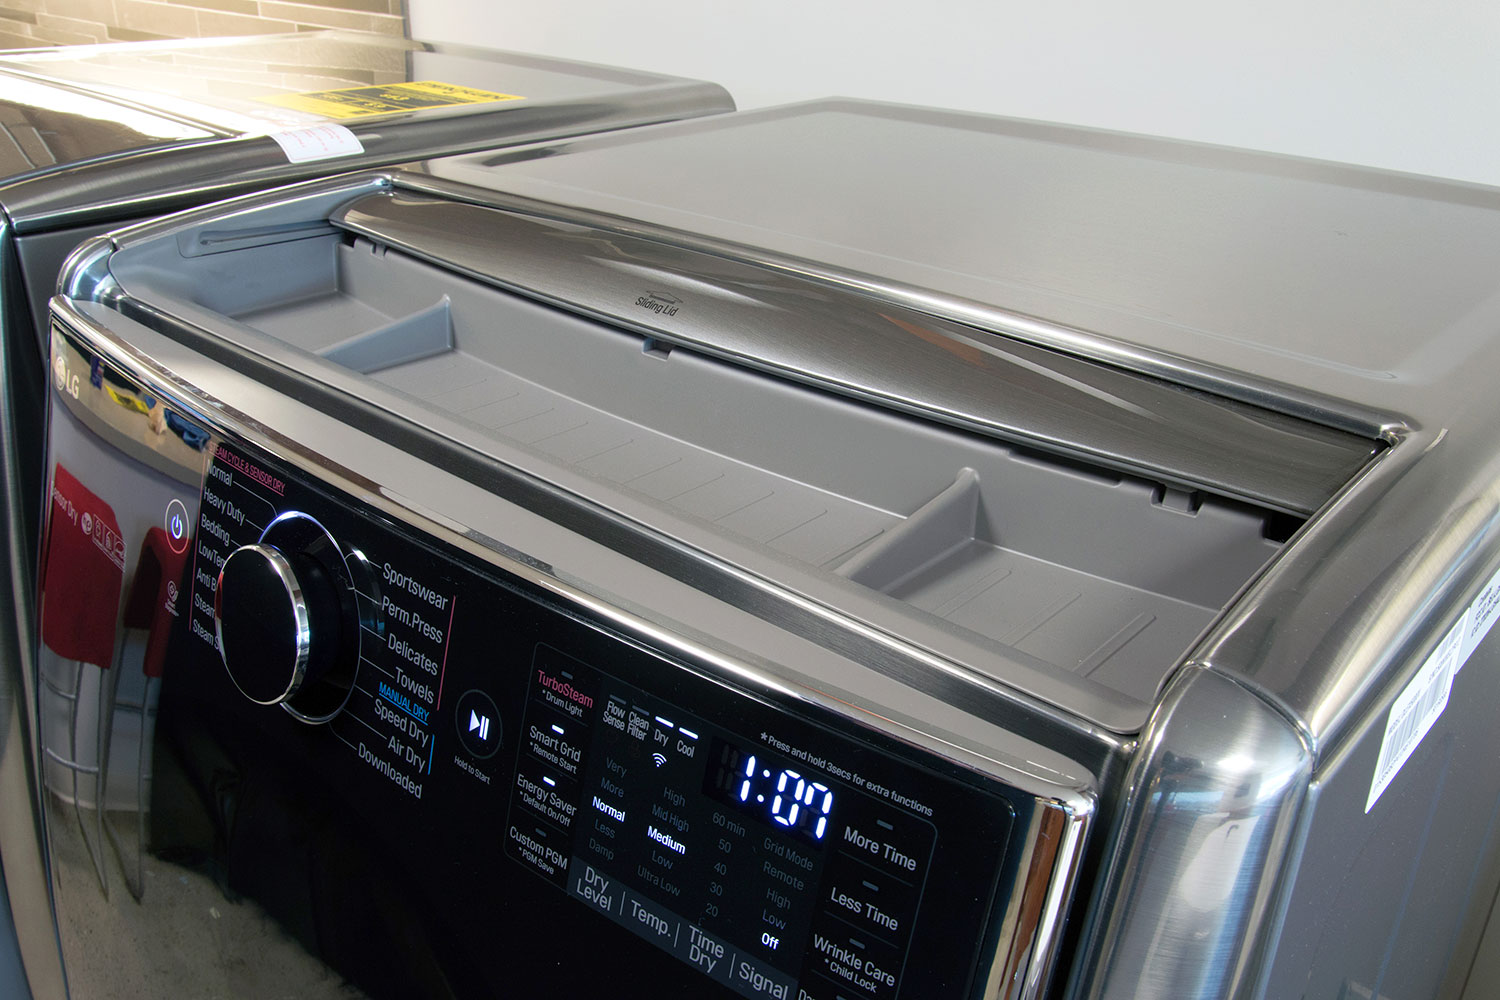 5 Must-Knows About LG Steam Dryers